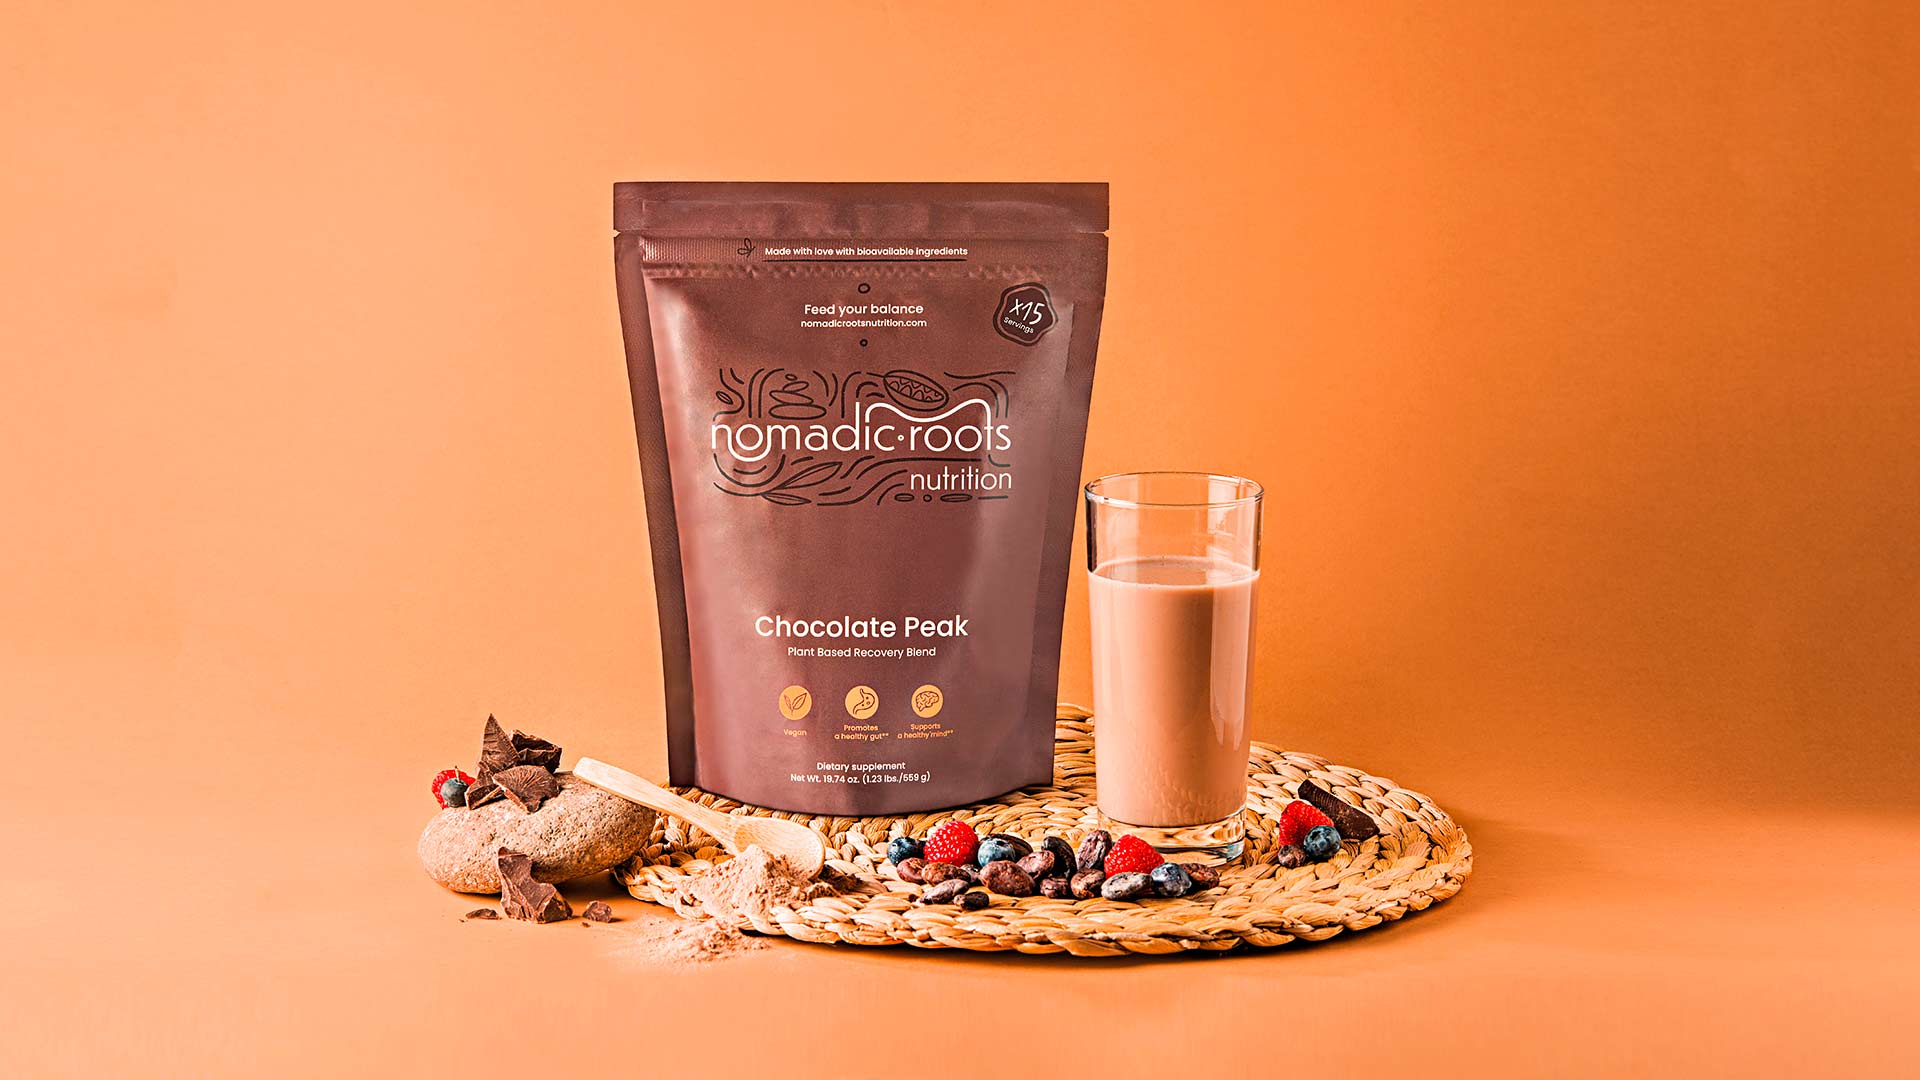 Nomadic Roots Nutrition